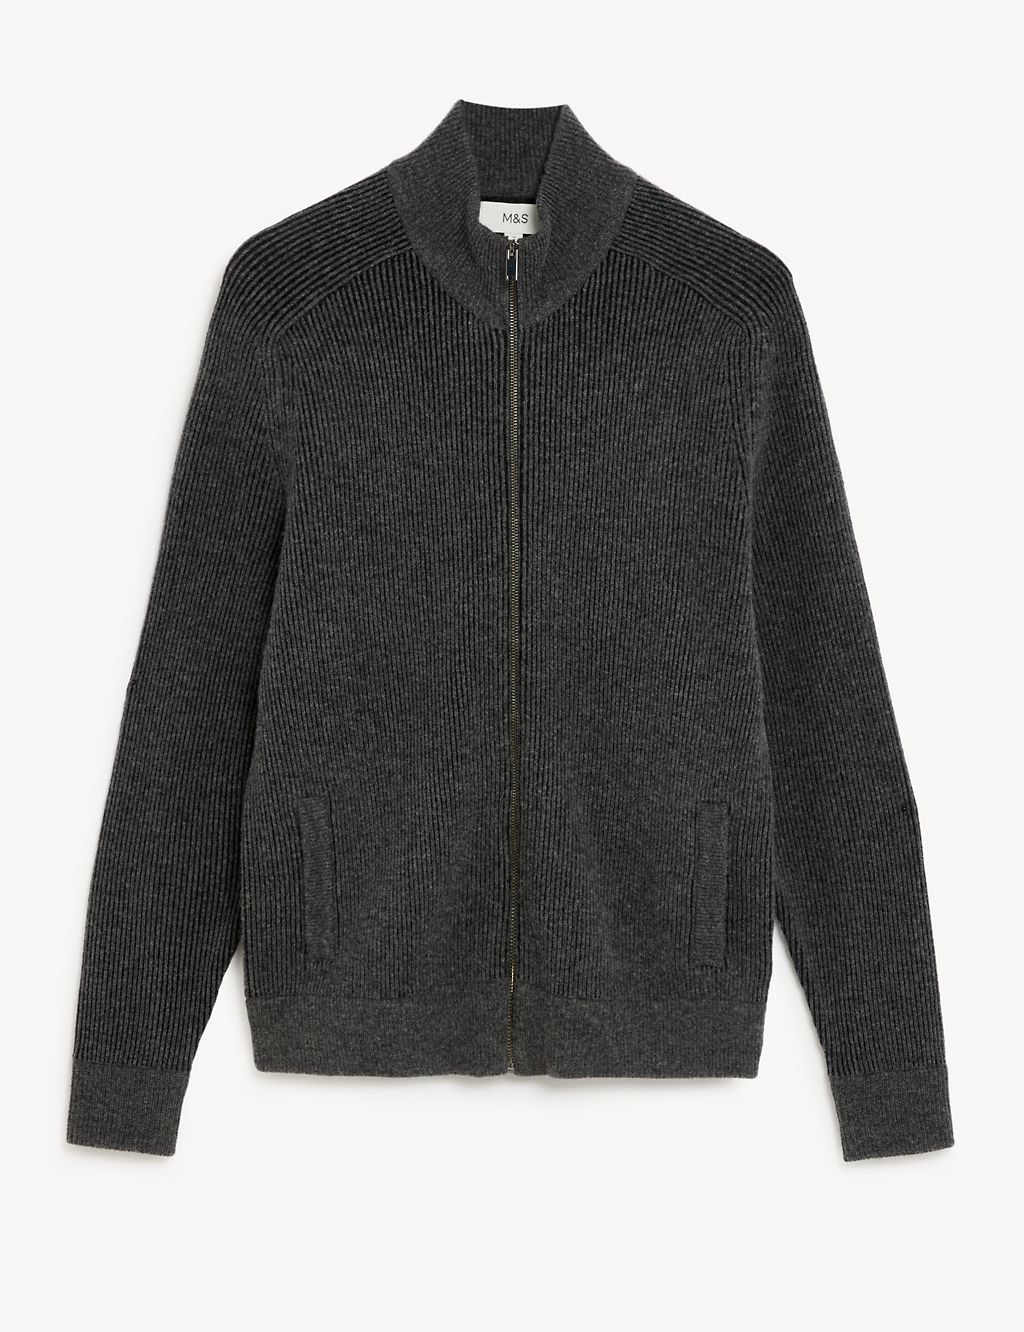 Cotton Lambswool Blend Knitted Jacket | M&S Collection | M&S